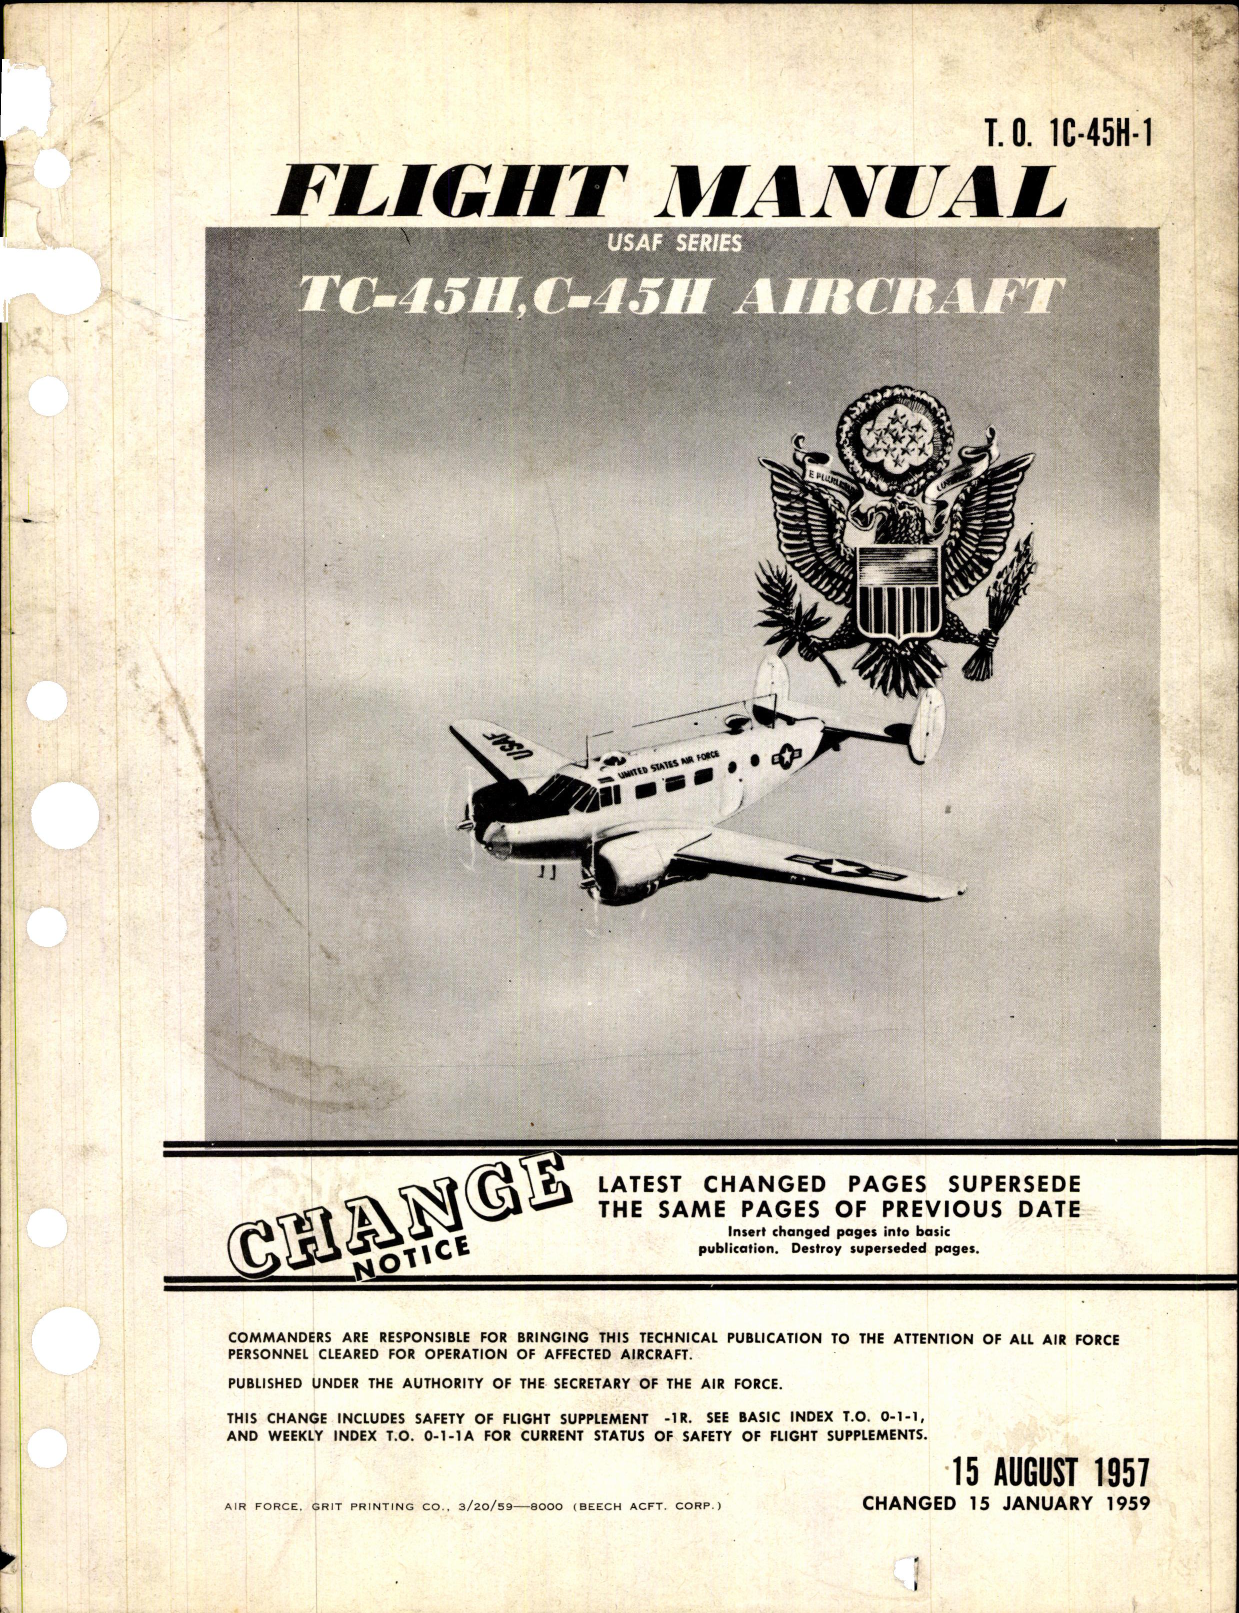 Sample page 1 from AirCorps Library document: Flight Manual for TC-45H and C-45H